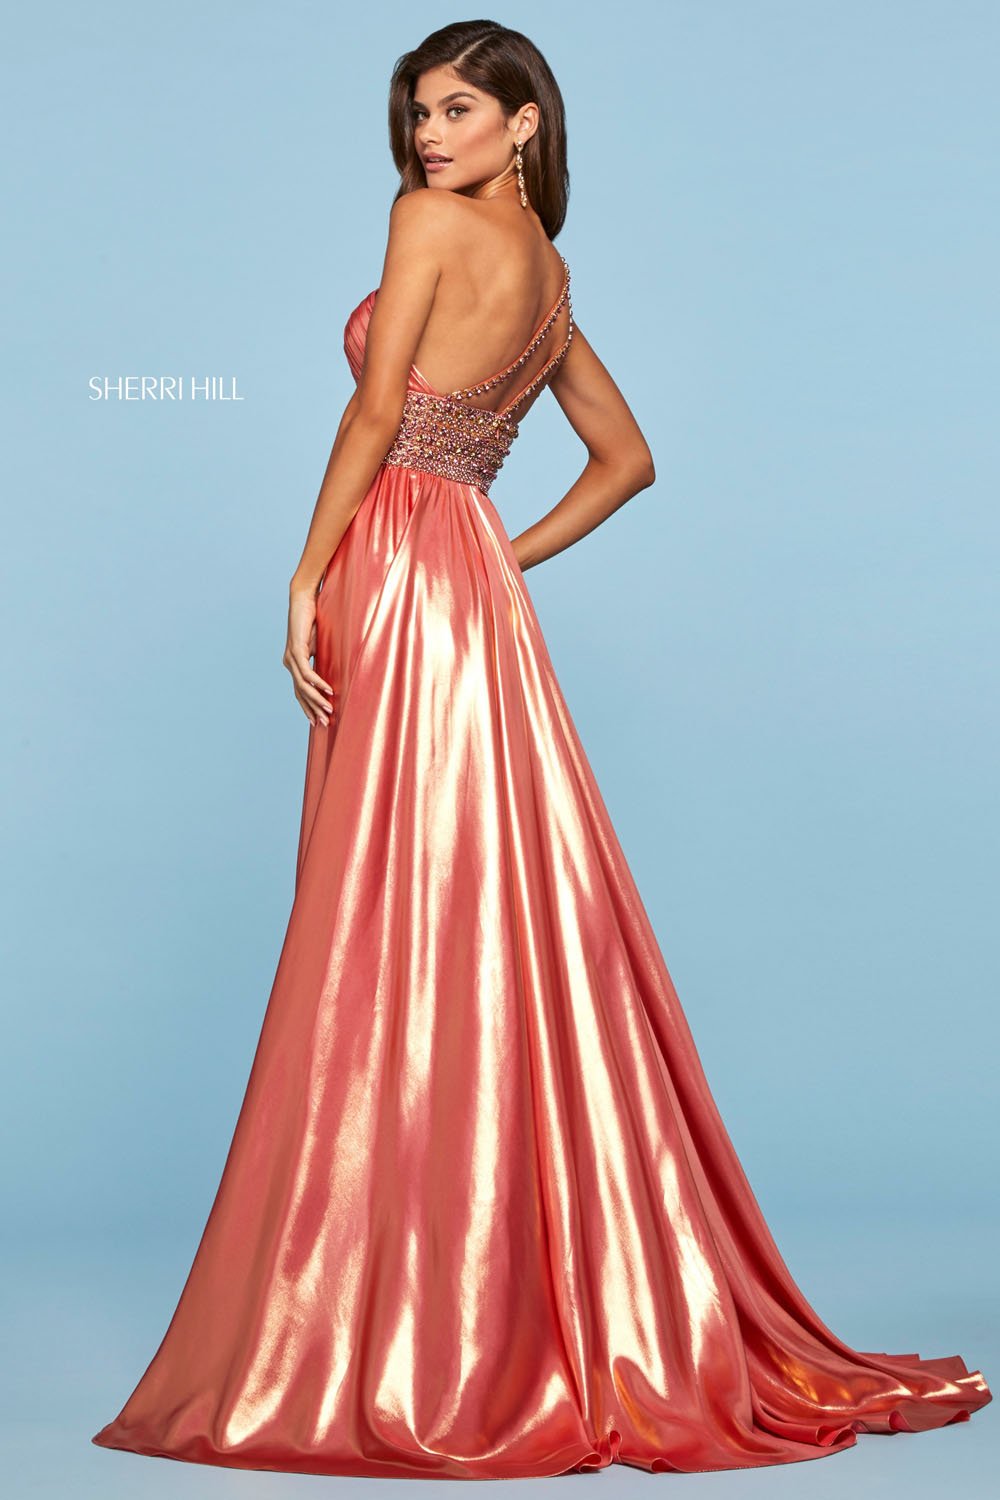 Sherri Hill 53304 dress images in these colors: Coral Gold, Lilac Gold.